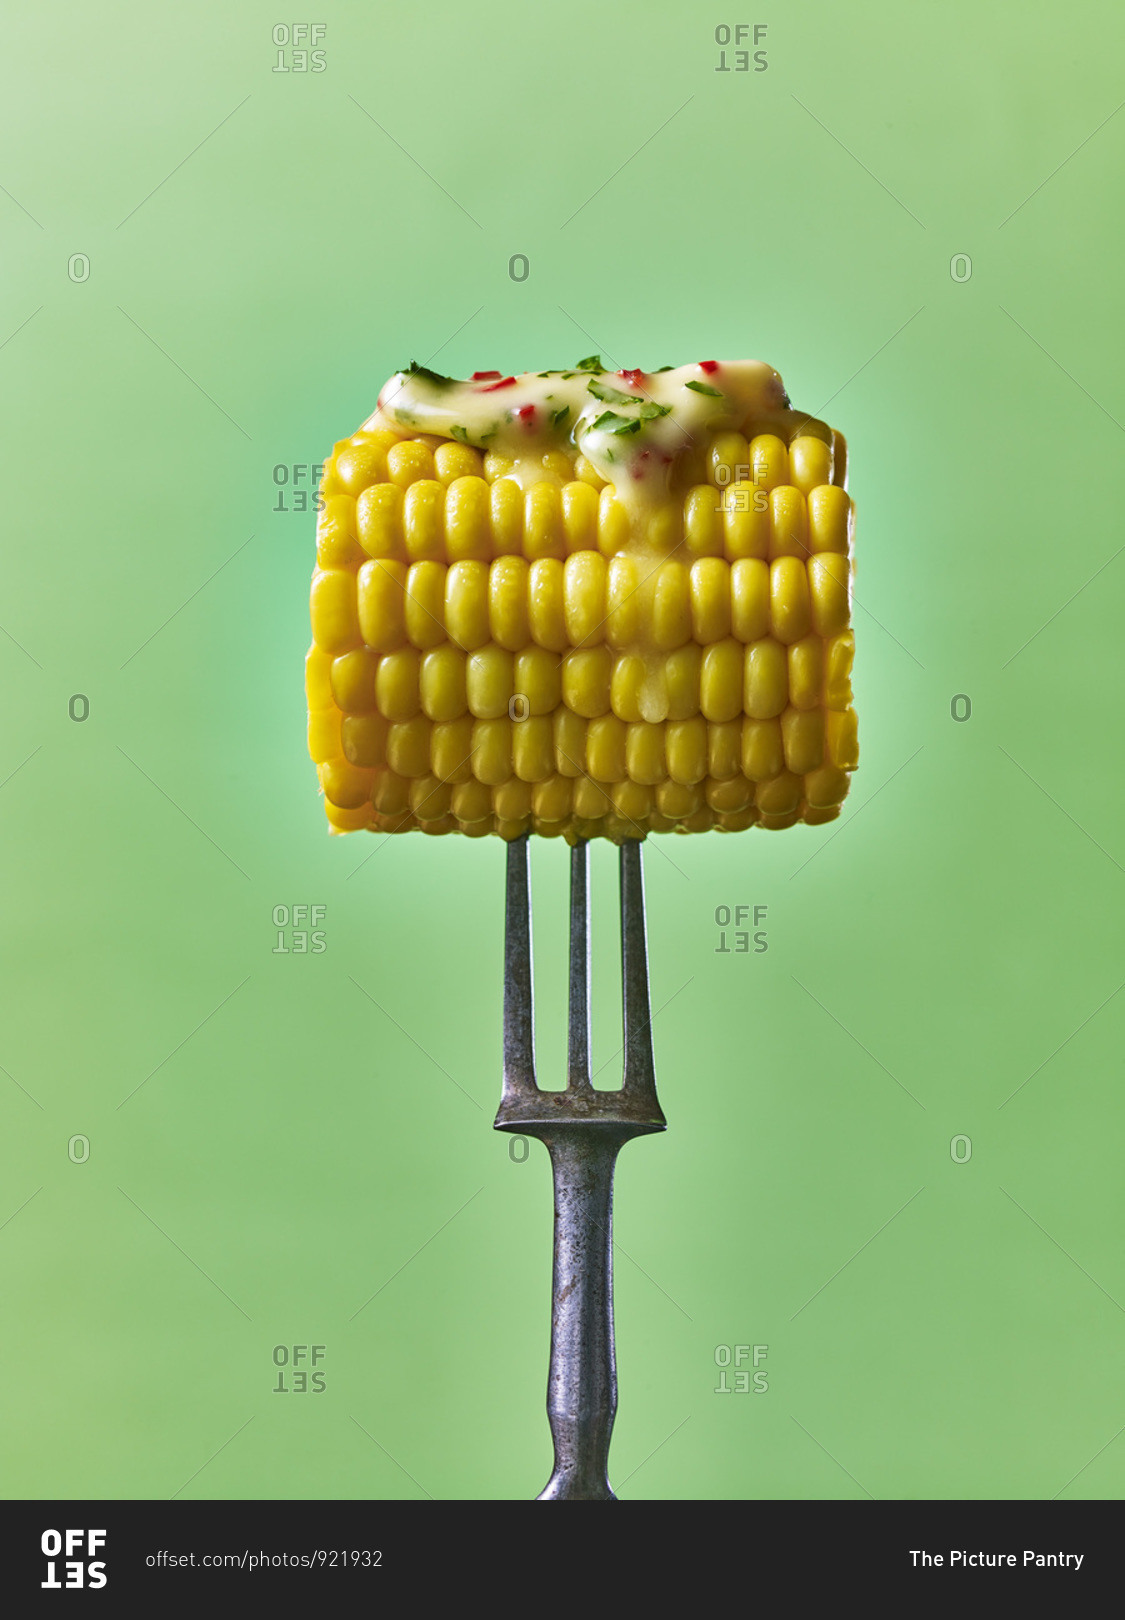 Corn on the cob with melted butter dripping, on a fork, against a green background